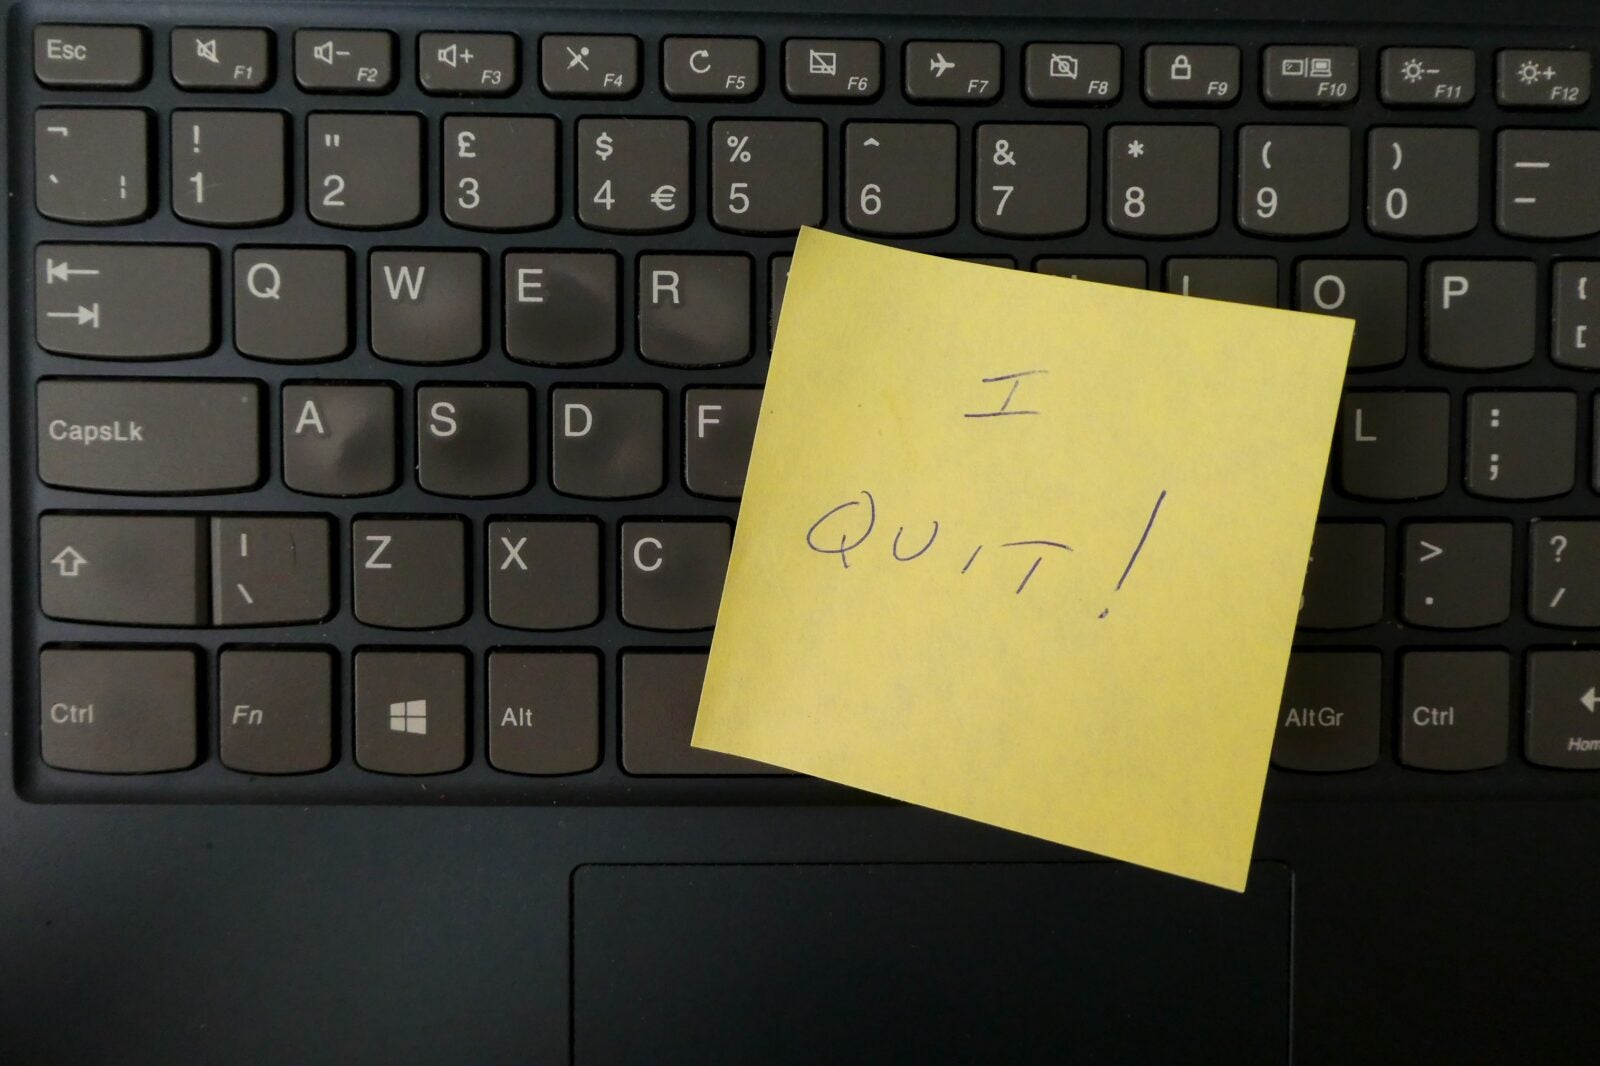 A sticky note pasted on a laptop's keyboard. The note reads: "I quit!"